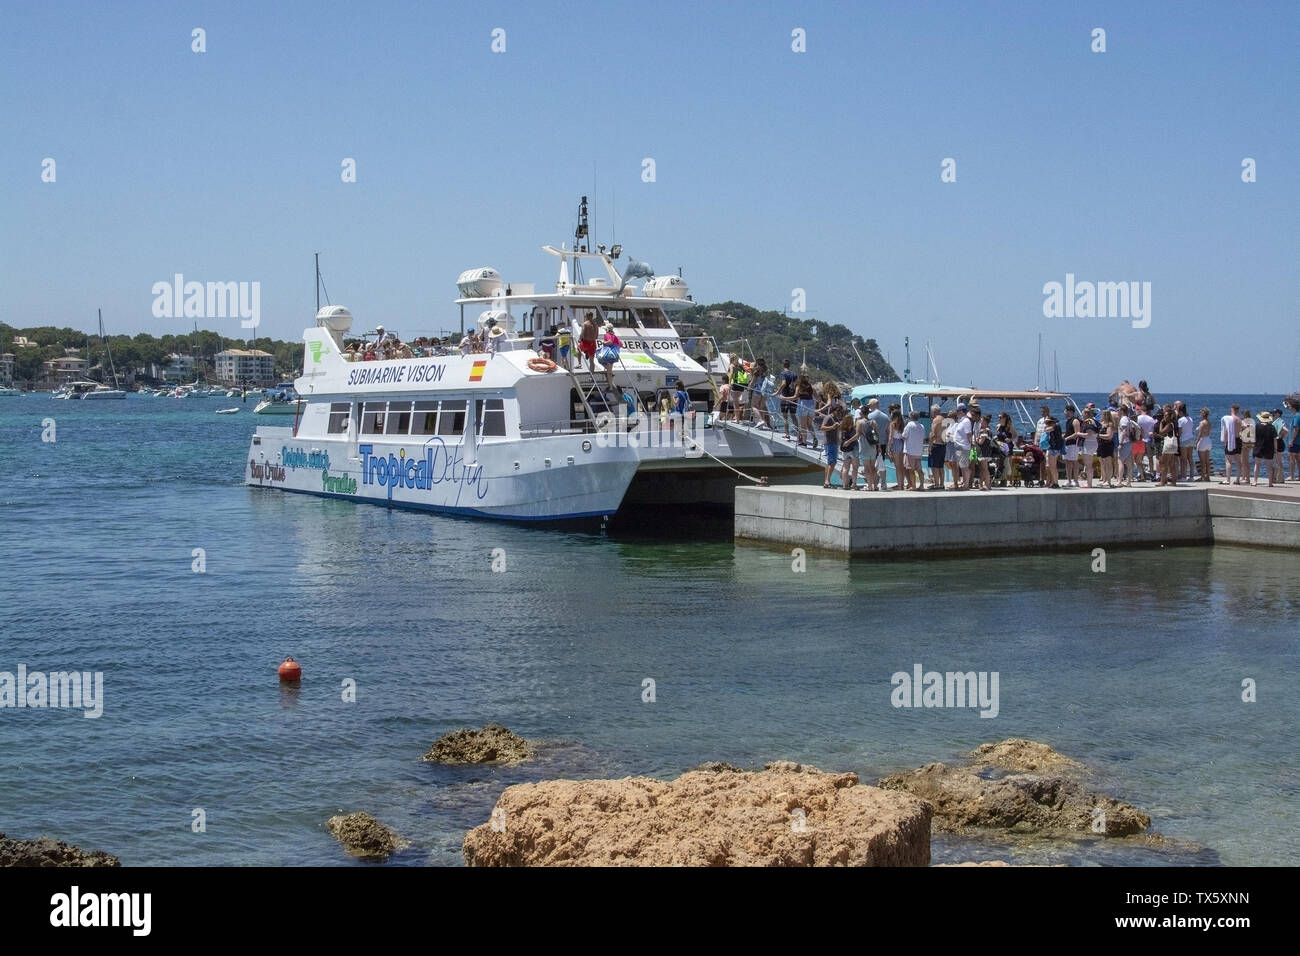 MALLORCA, SPAIN - JUNE 23, 2019: Passengers in line for tourboat Tropical with Cruceros Cormoran on a sunny day at sea on June 23, 2019 in Mallorca, S Stock Photo